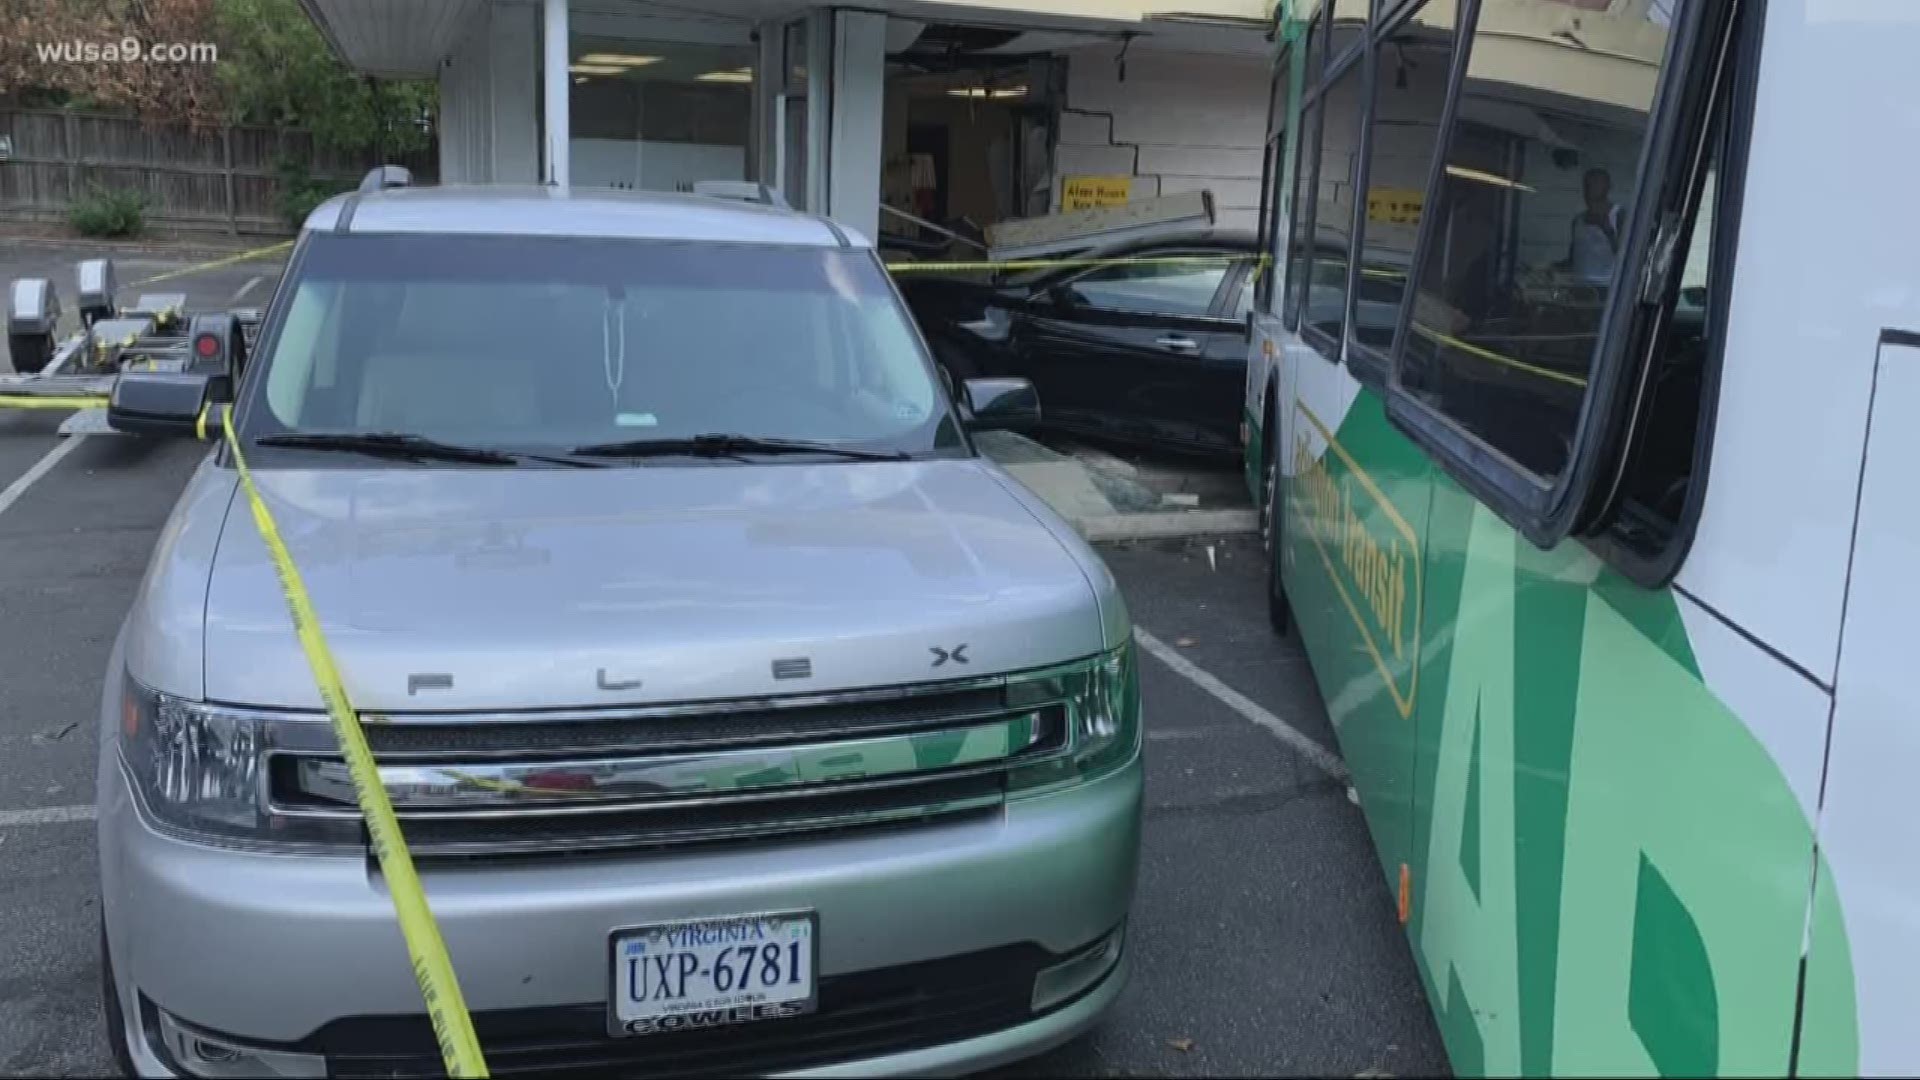 An Arlington Transit Bus struck several parked cars and before slamming into a building Tuesday afternoon. The incident happened at Columbia Pike and South George Mason Drive, according to police.